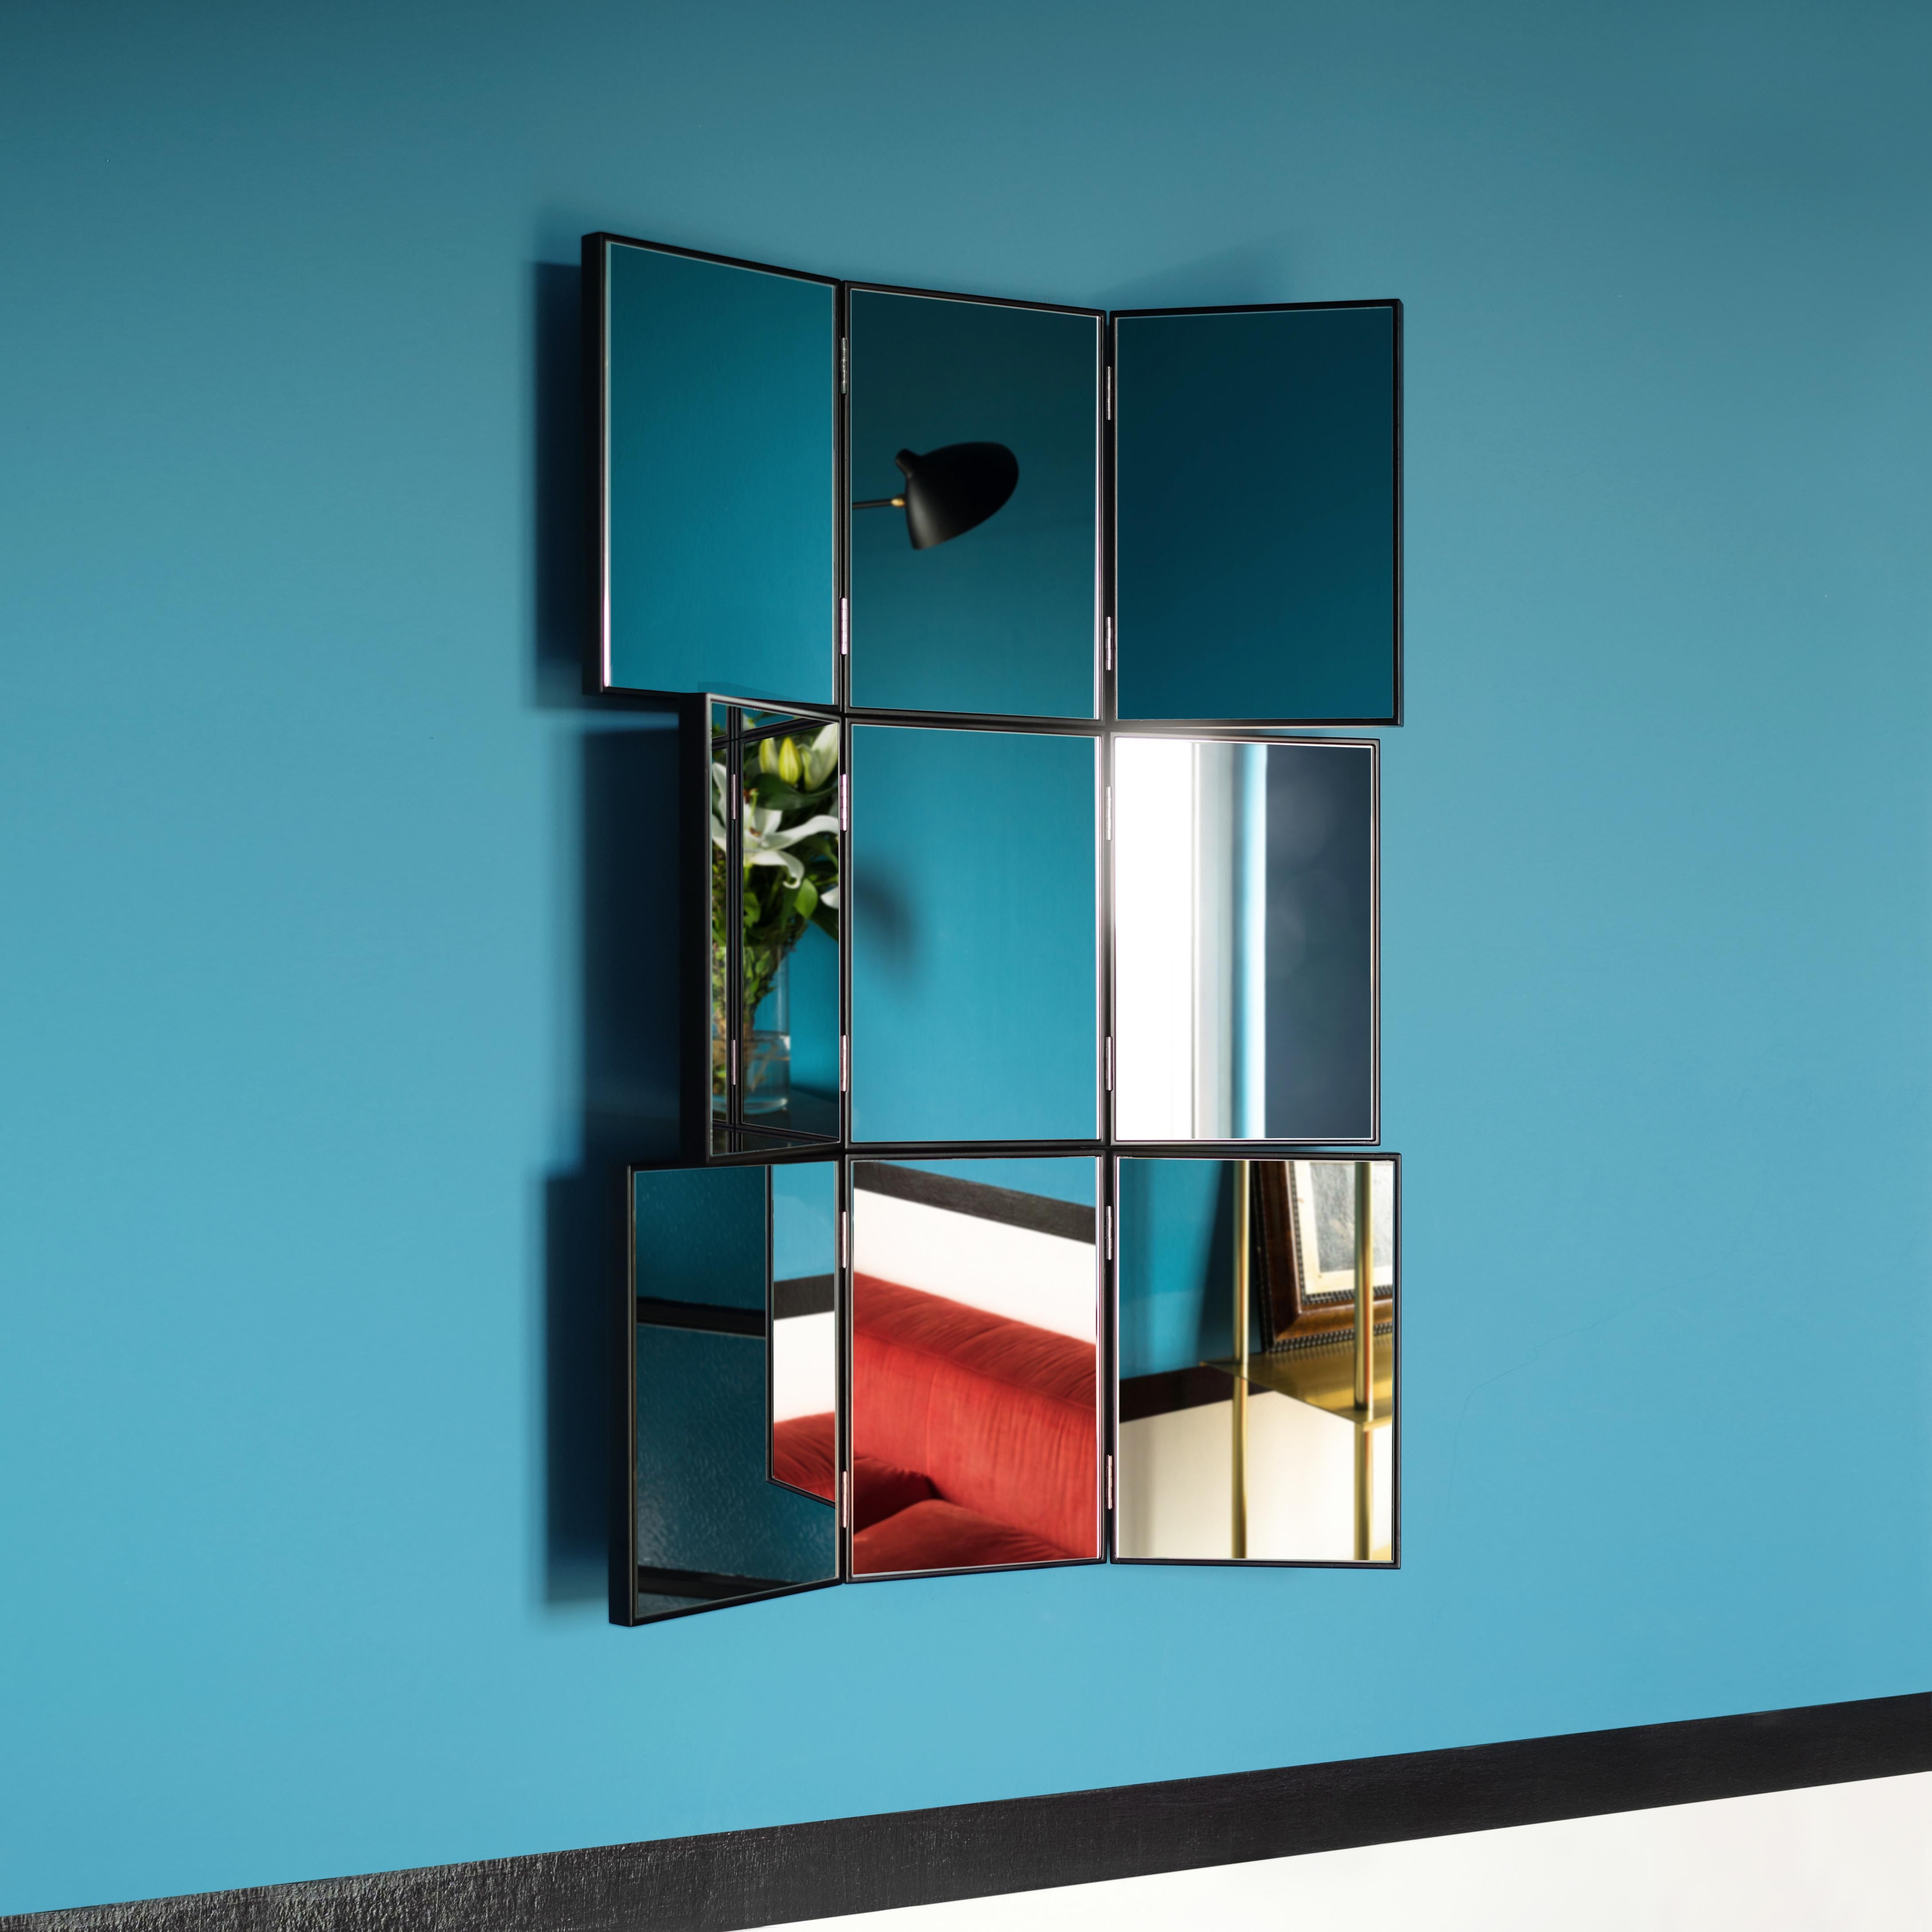 Mirror 02
Adjustable wall mirror with rotating panels and lacquered wooden structure. The moving panels allow the reflection to be interrupted and dynamically play with the surroundings, making this piece a charming presence in any environment. The